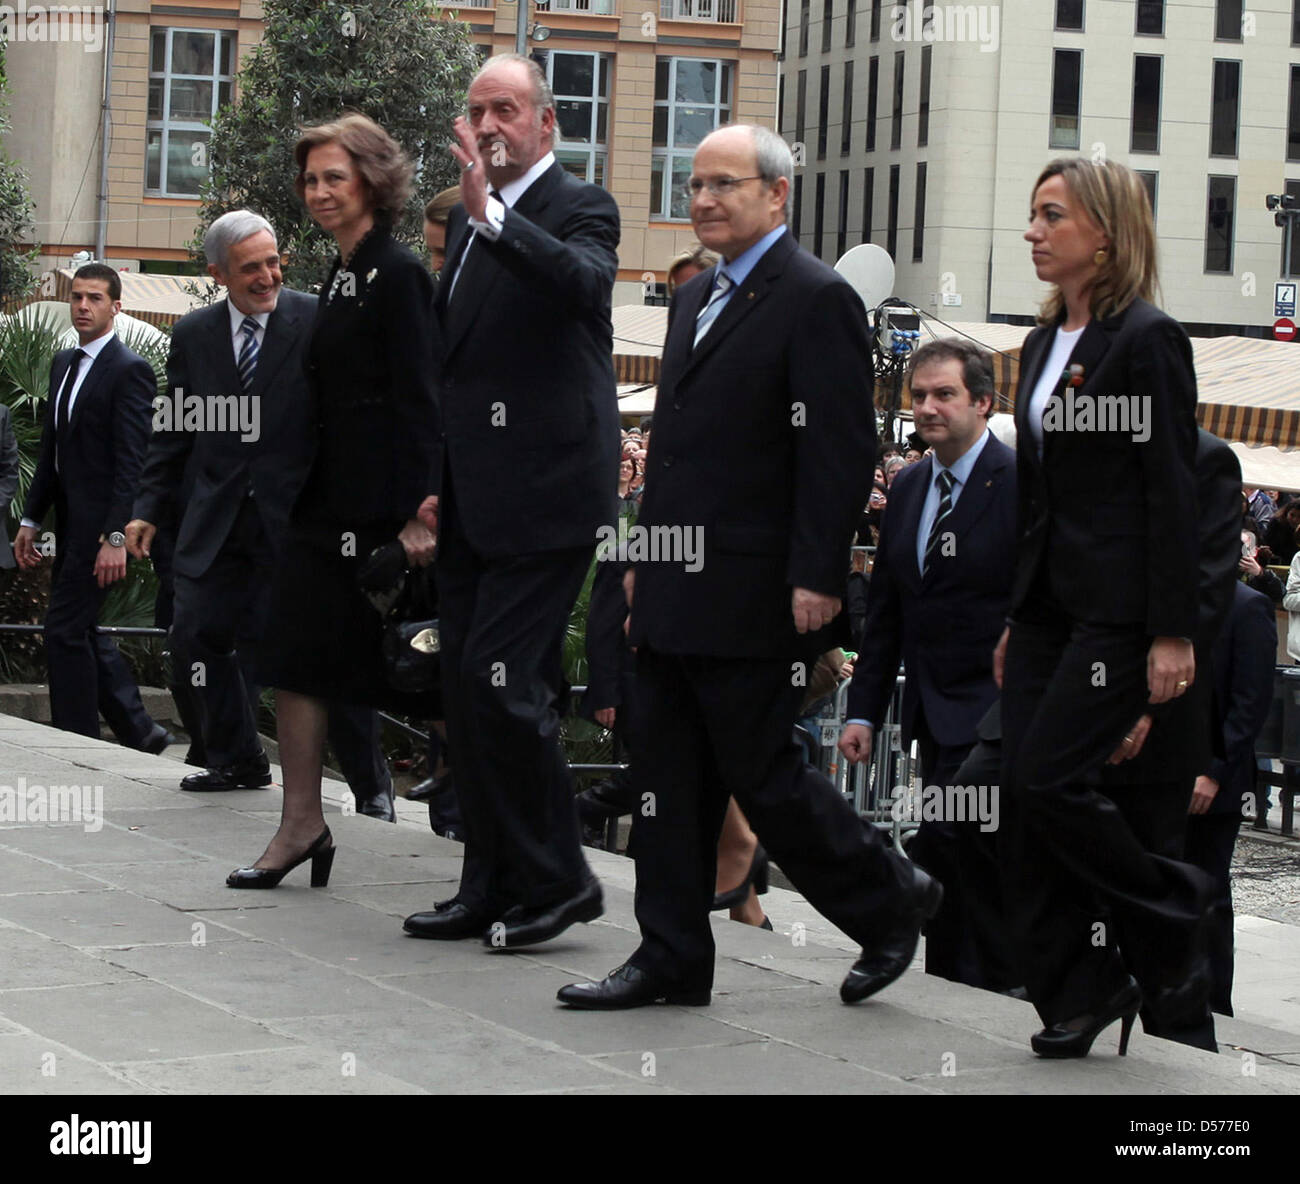 Spanish Minister of Defence Carme Chacon (R-L), Jordi Hereu, Mayor of Barcelona, Jose Montilla , President of the Generalitat of Catalonia, King Juan Carlos of Spain and Queen Sofia of Spain arrive for the funeral of former IOC president Juan Antonio Samaranch set up at the Palau de la Generalitat in Barcelona, Spain, 22 April 2010. Samaranch, who headed the IOC from 1980 to 2001,  Stock Photo